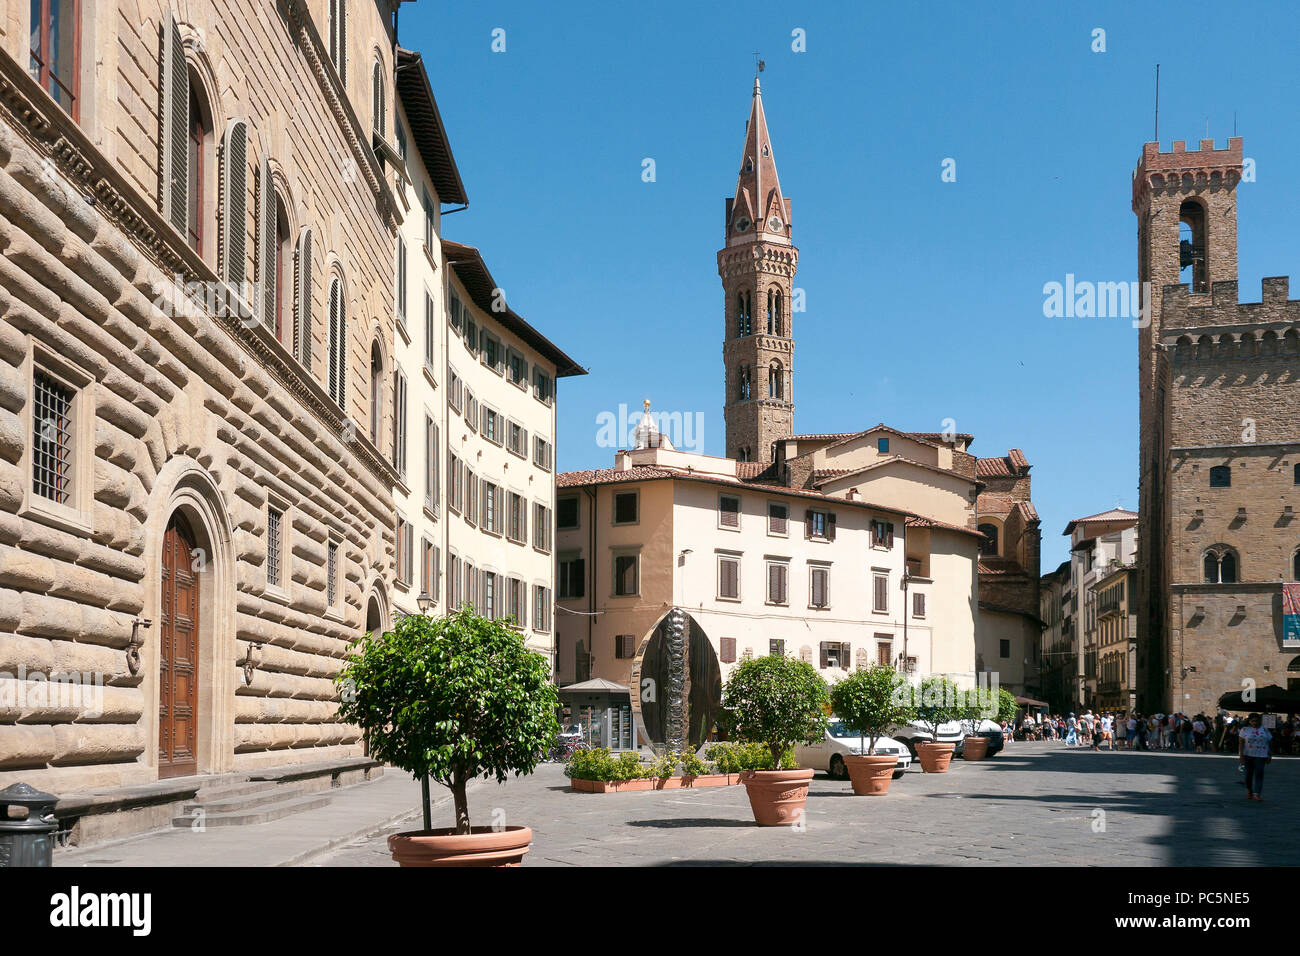 Medieval architecture in a plaza, with a church steeple in the background, in Florence, Italy Stock Photo